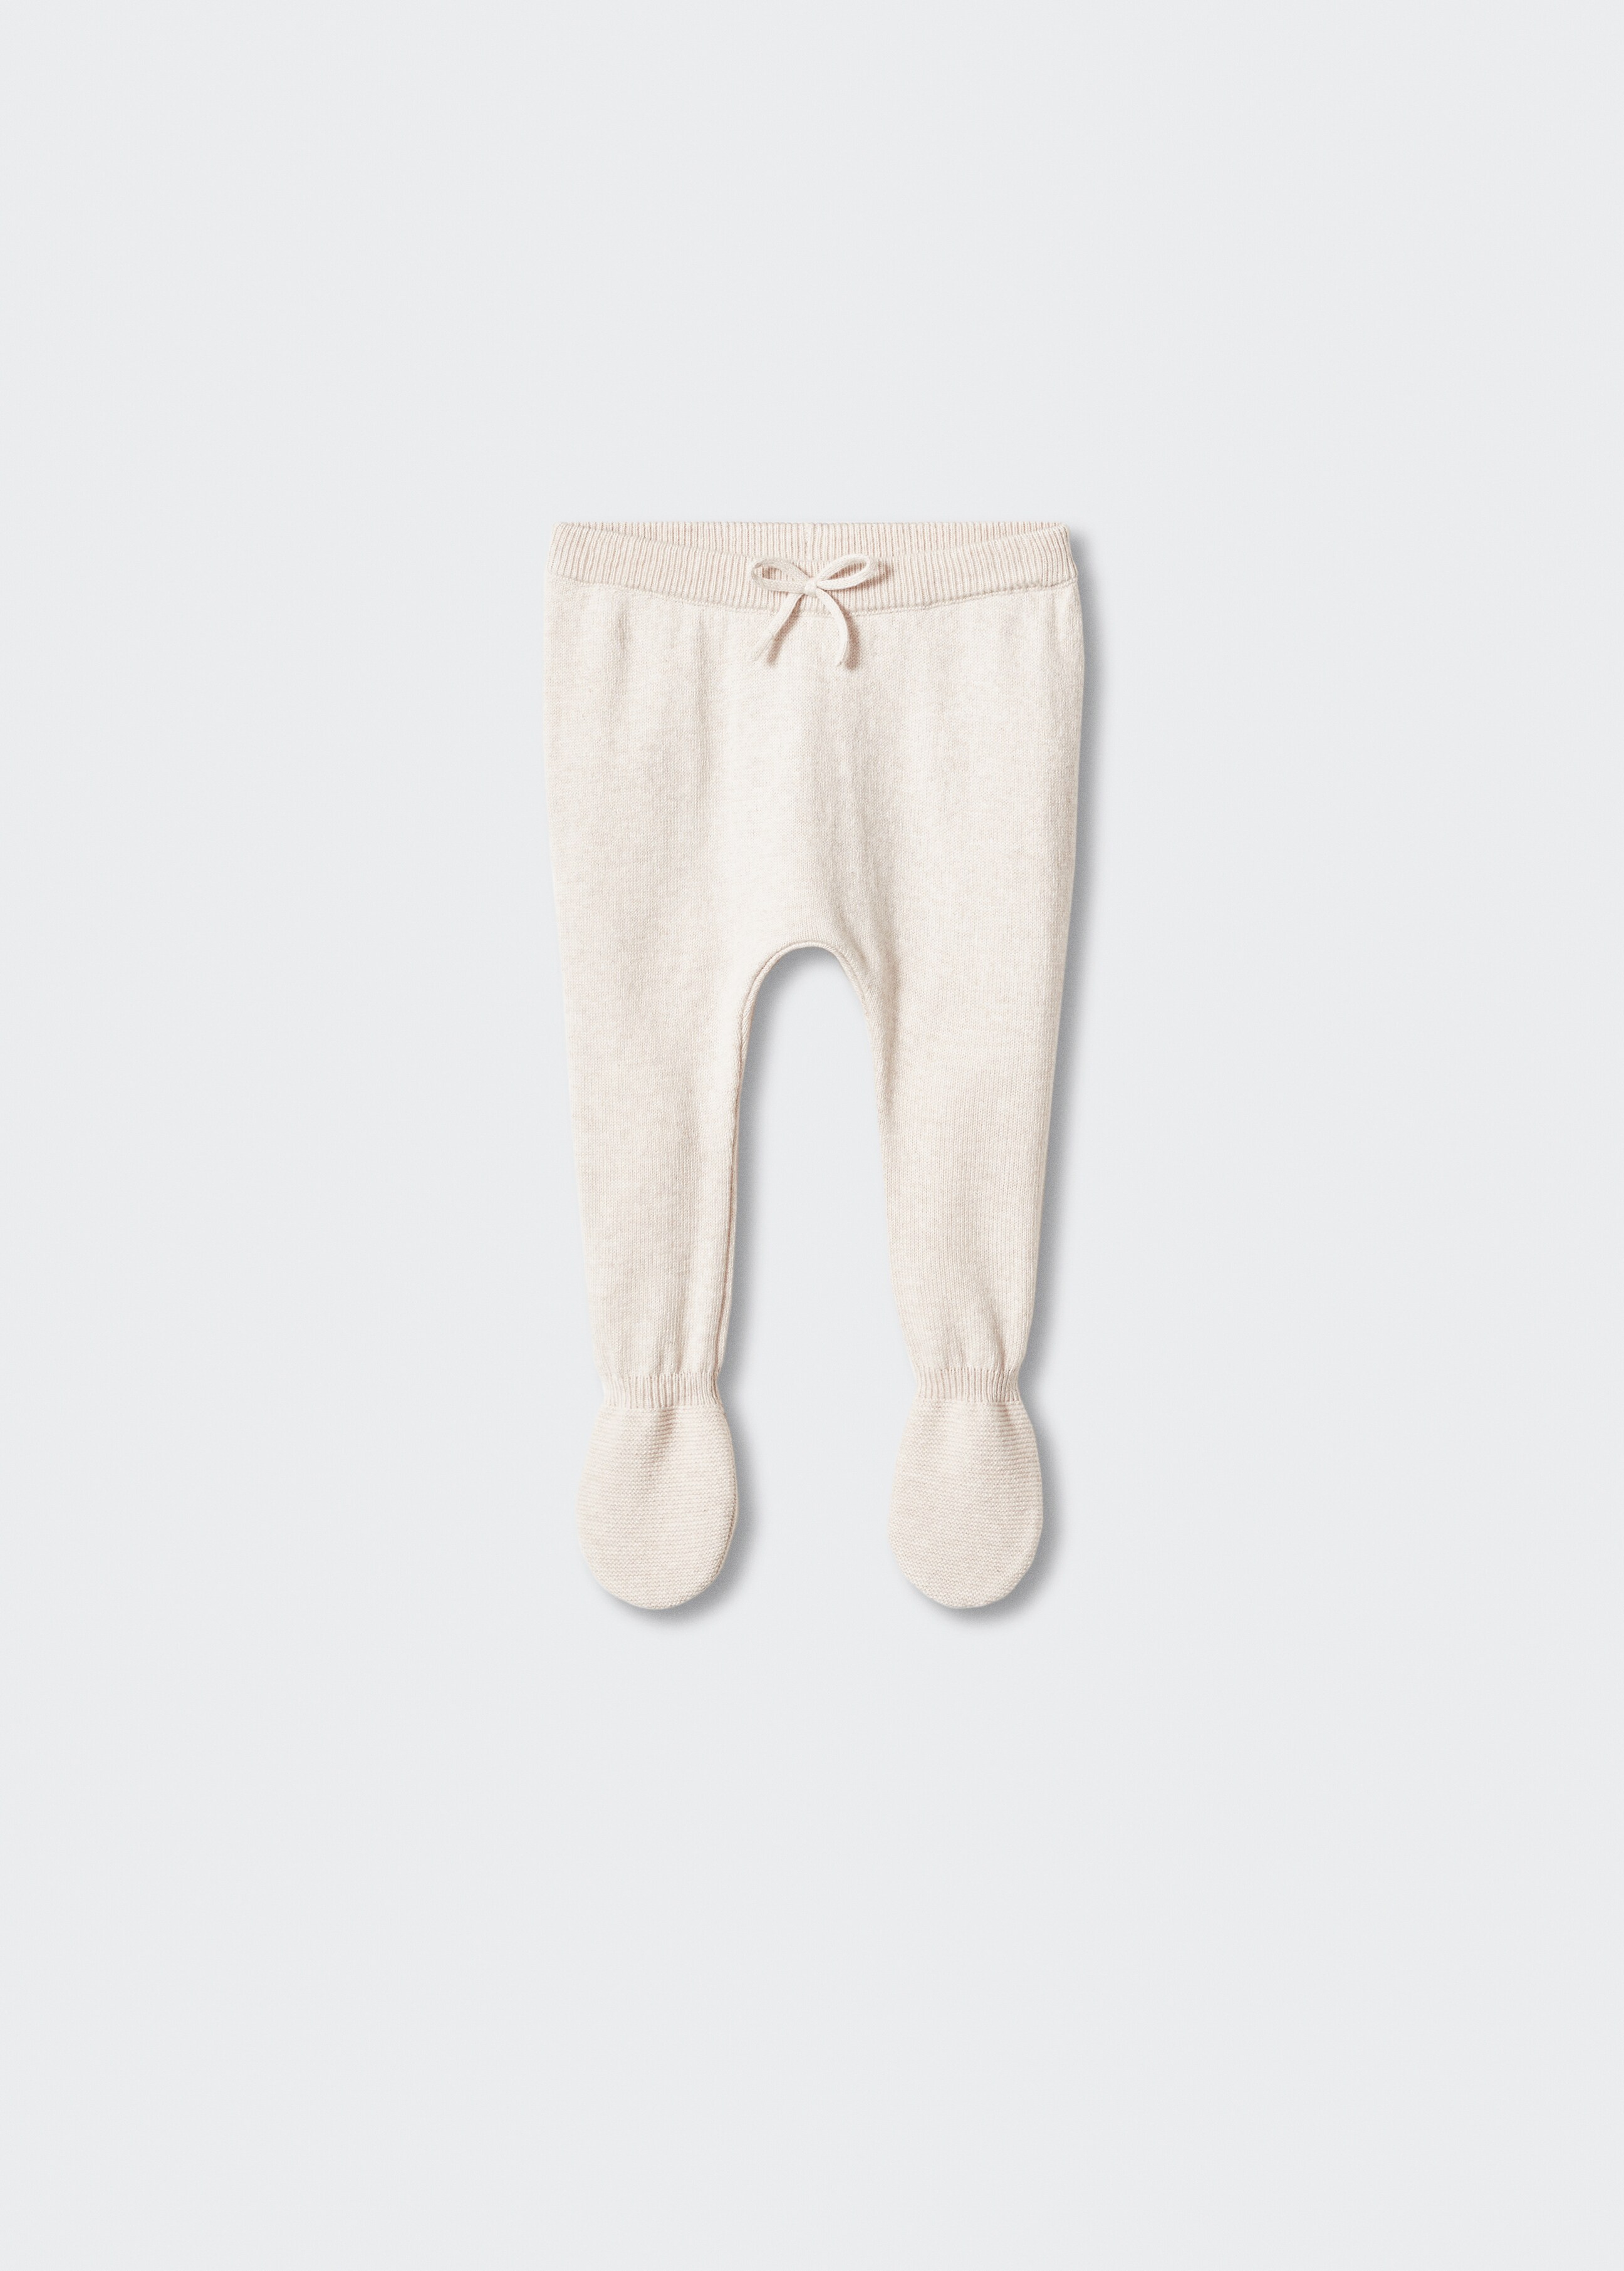 Knit footed pants - Article without model